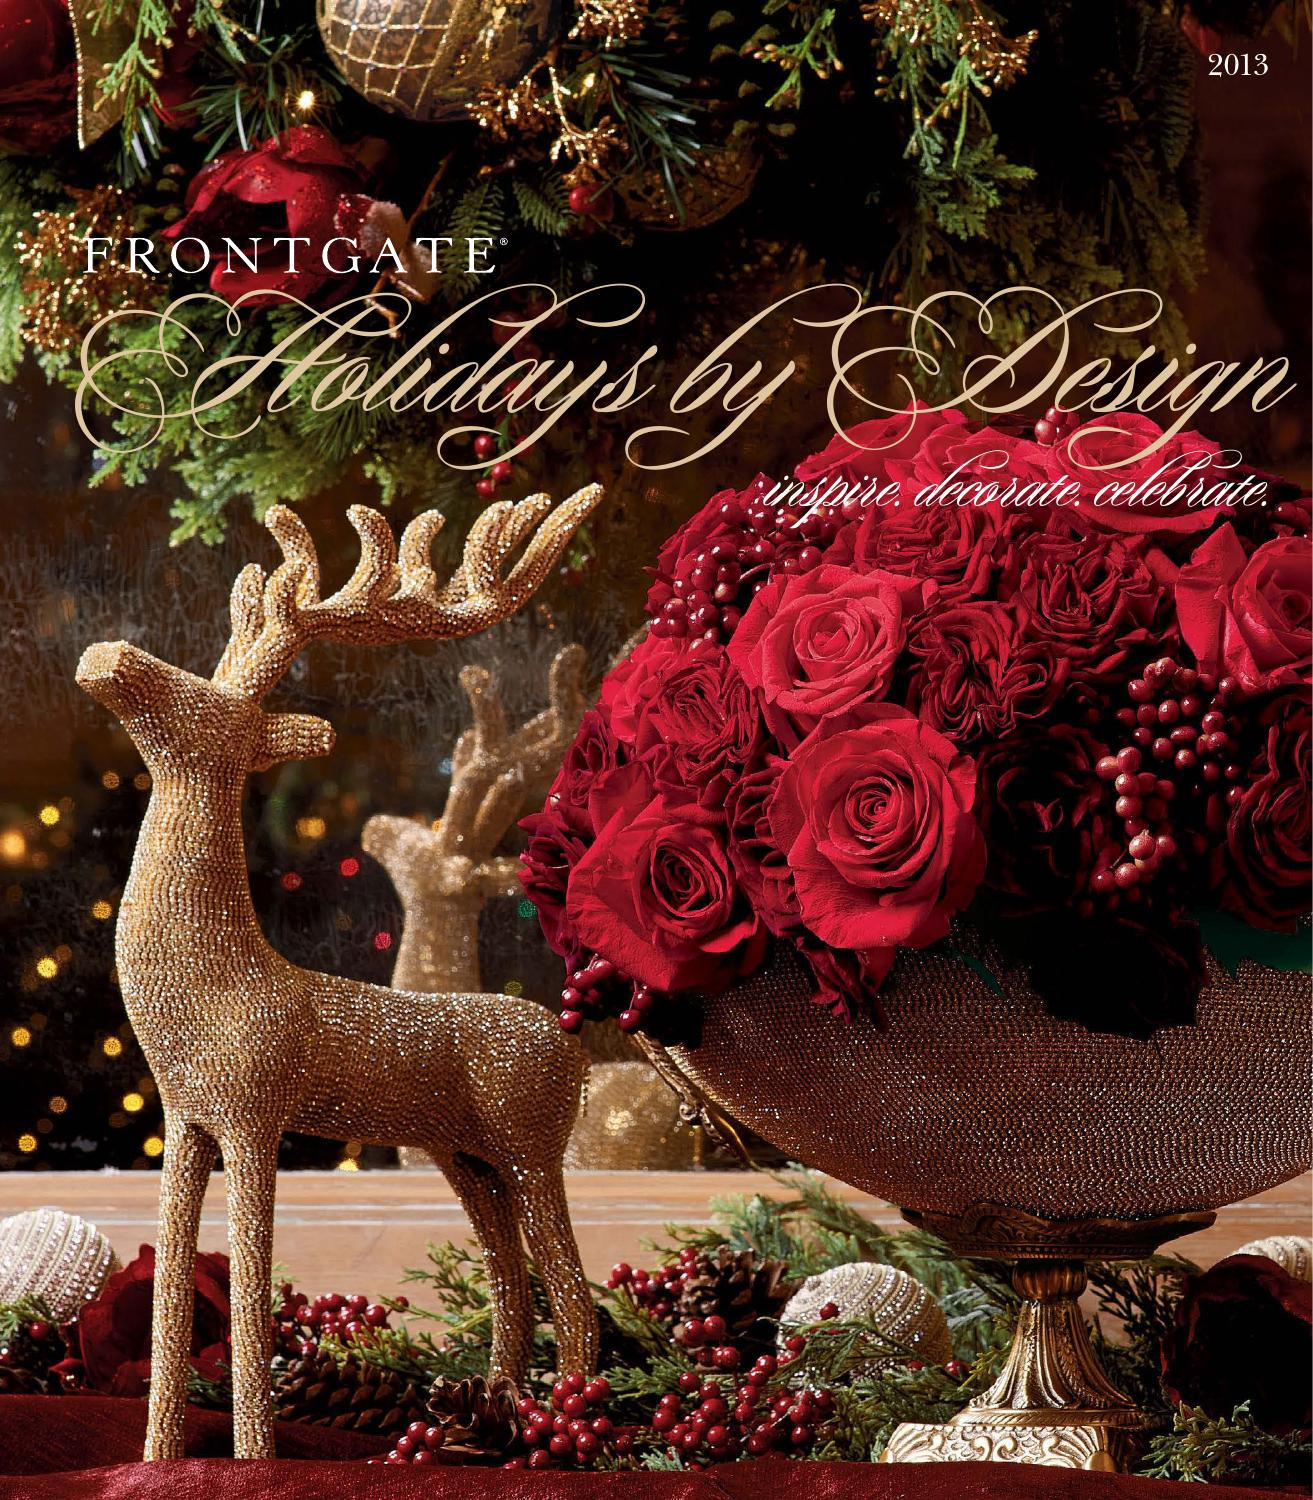 Front Gate Christmas
 Frontgate Holidays by Design 2013 catalog by Amy Howell